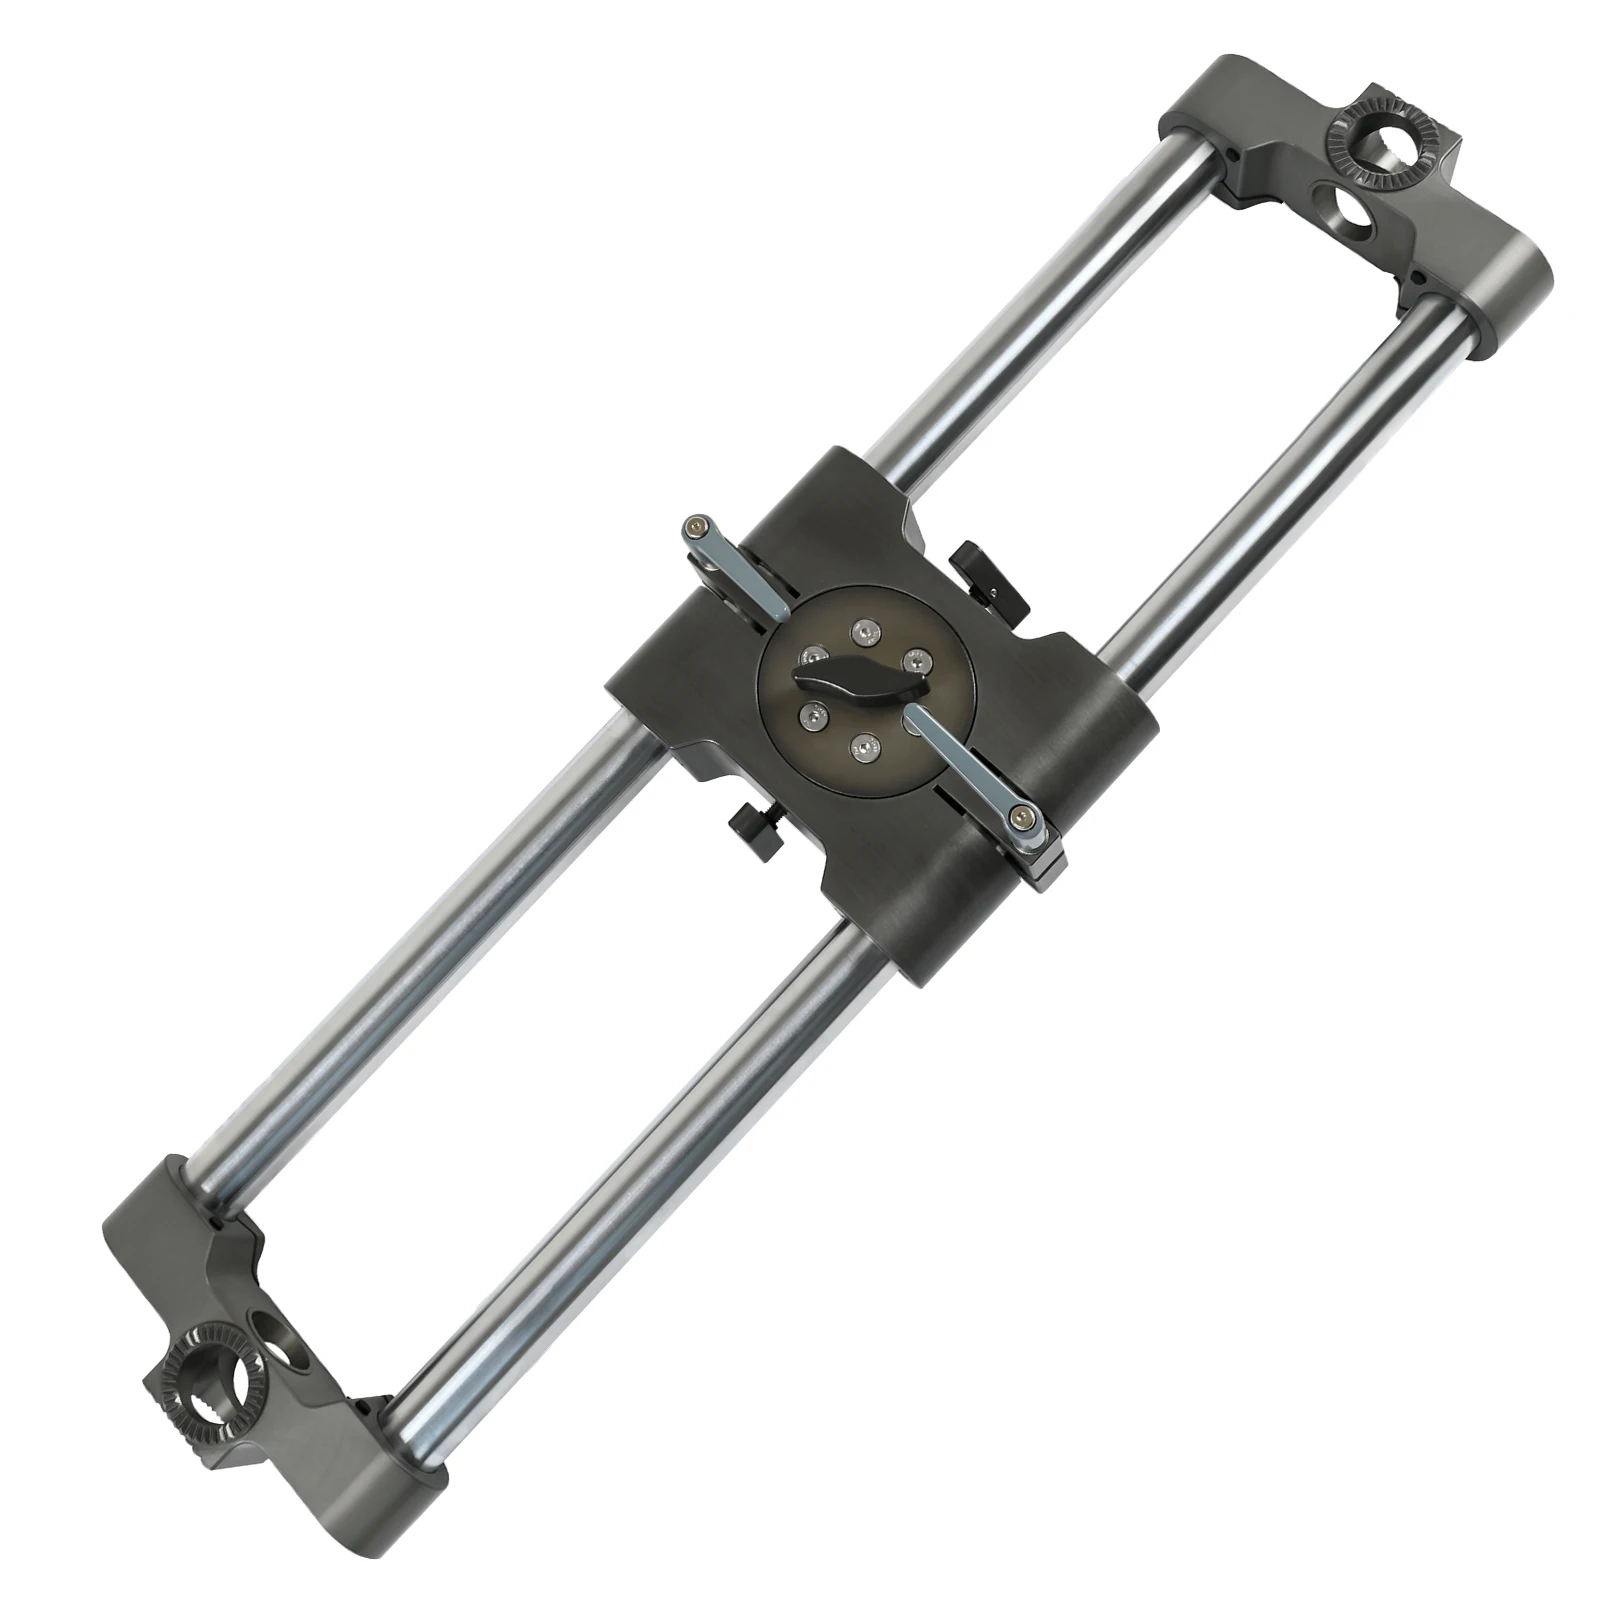 

NSH Camera Video Track Dolly Photo Video Slider Rail for Filming Equipment（Please contact to change the shipping cost）